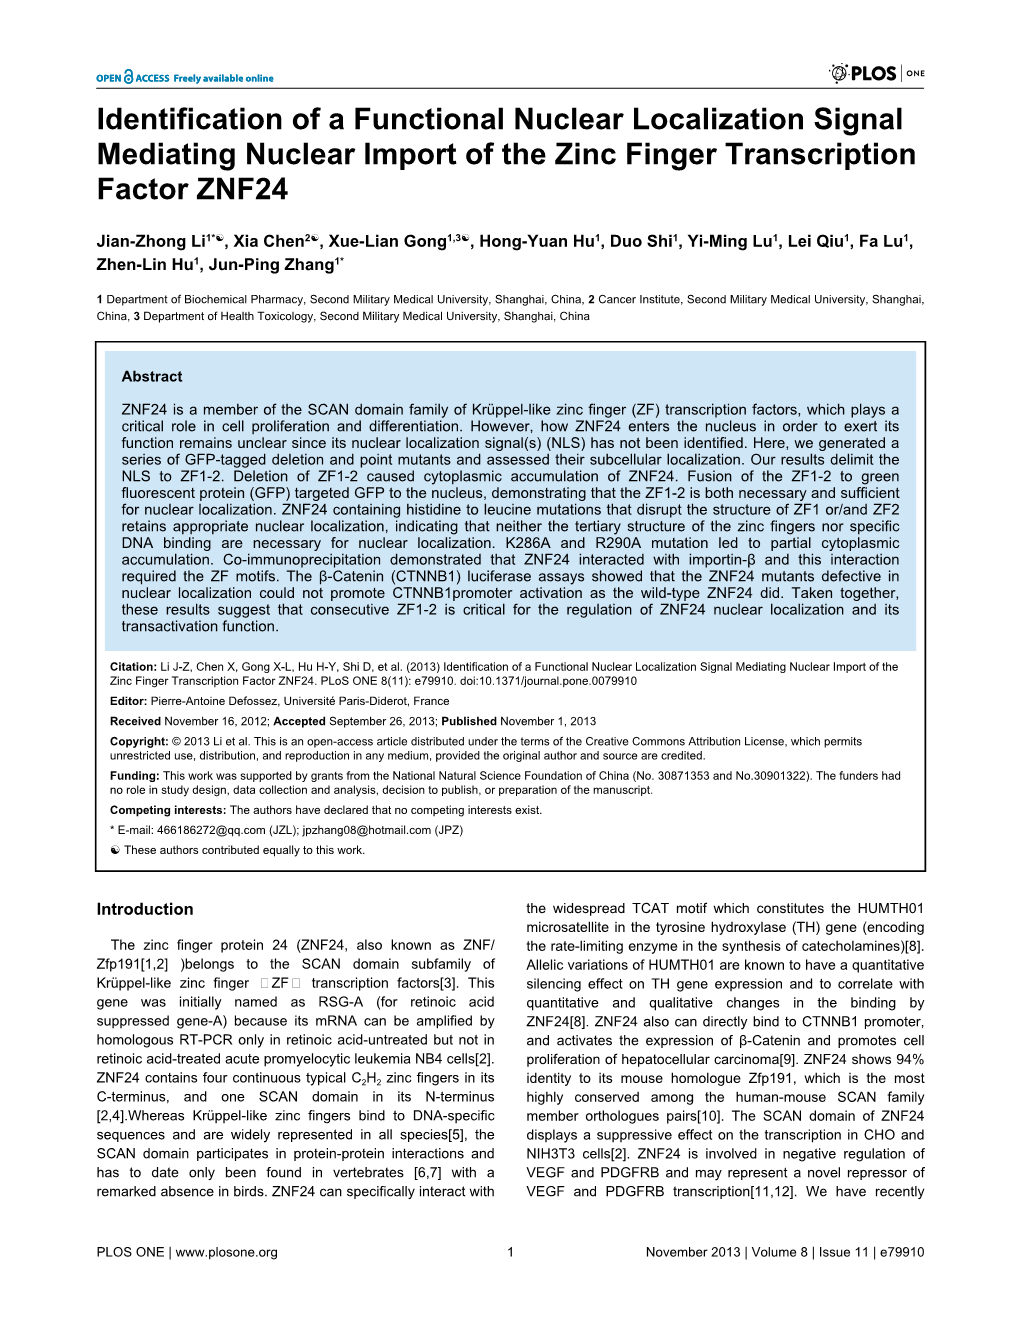 Identification of a Functional Nuclear Localization Signal Mediating Nuclear Import of the Zinc Finger Transcription Factor ZNF24